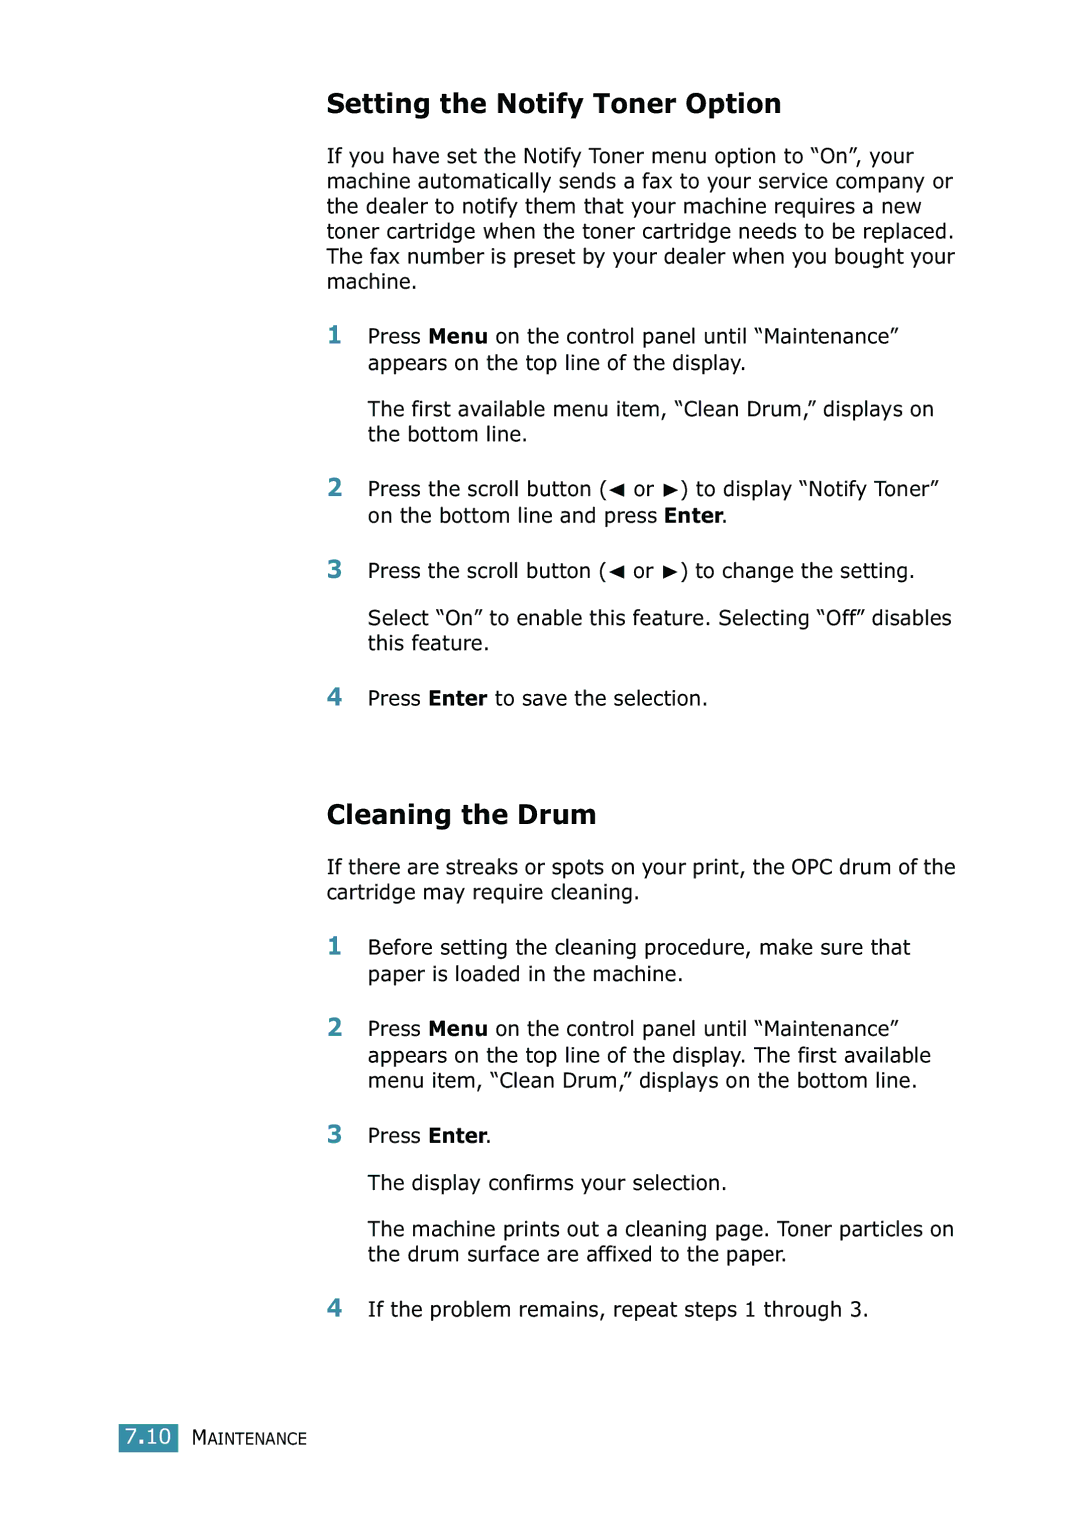 Xerox WorkCentre PE16 manual Setting the Notify Toner Option, Cleaning the Drum 